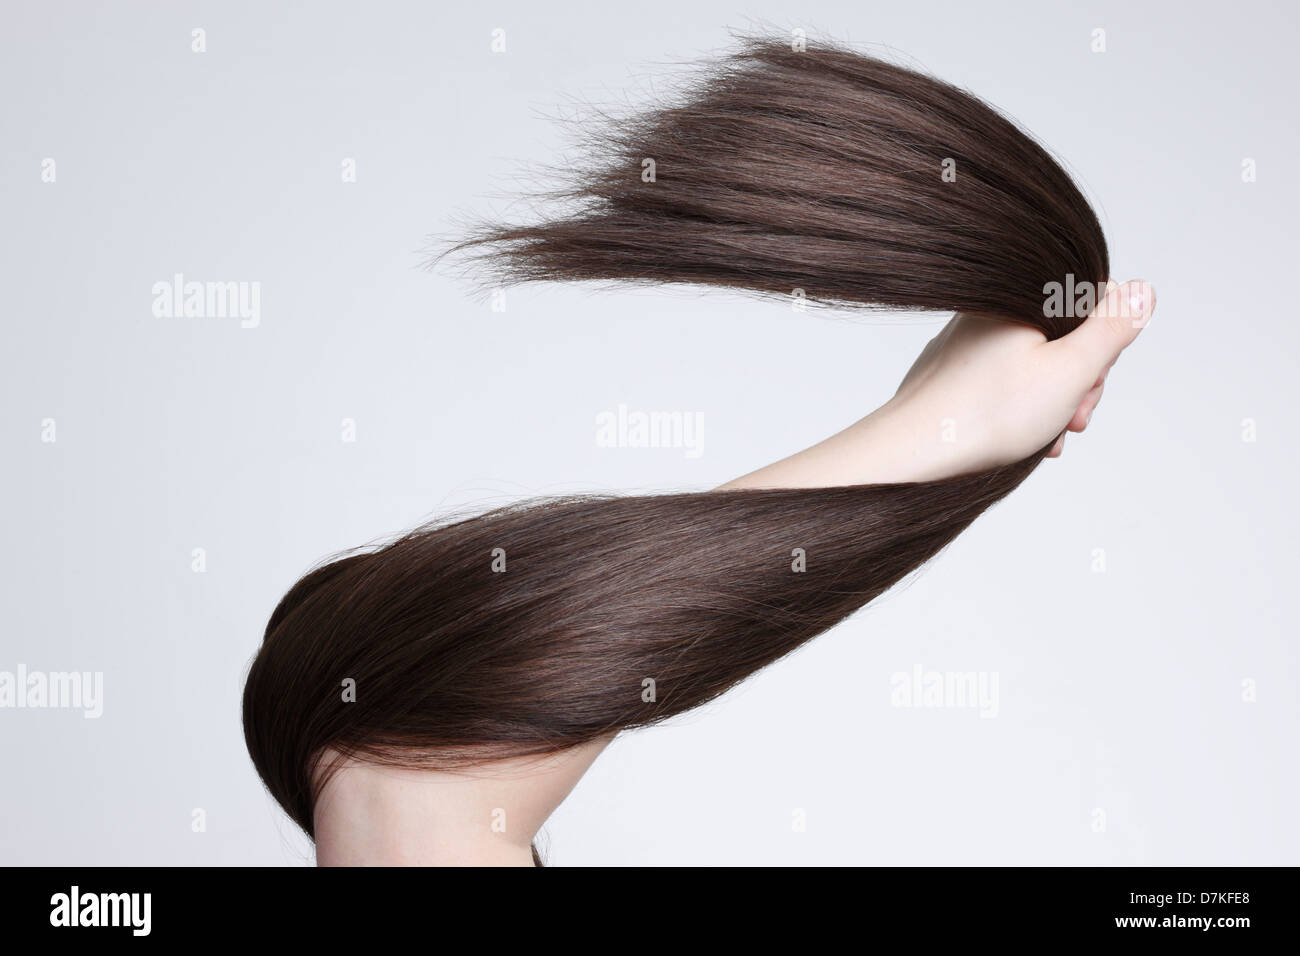 Human hand holding brown hair against white background, close up Stock Photo